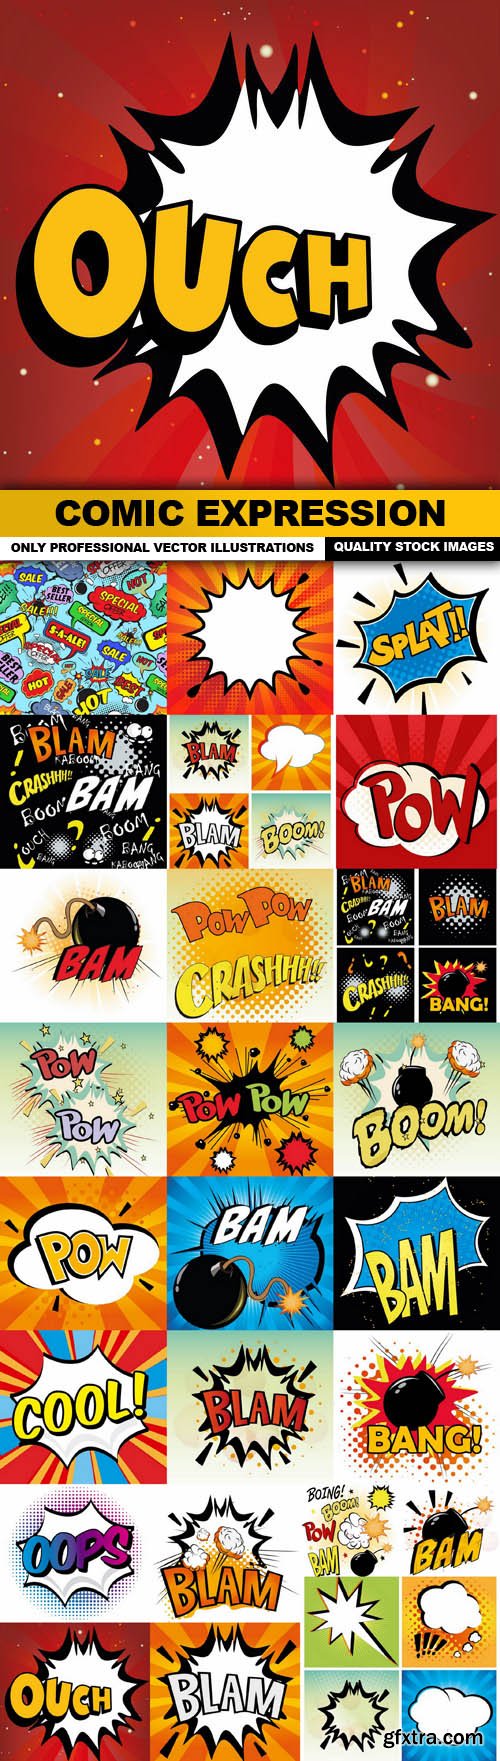 Comic Expression - 25 Vector